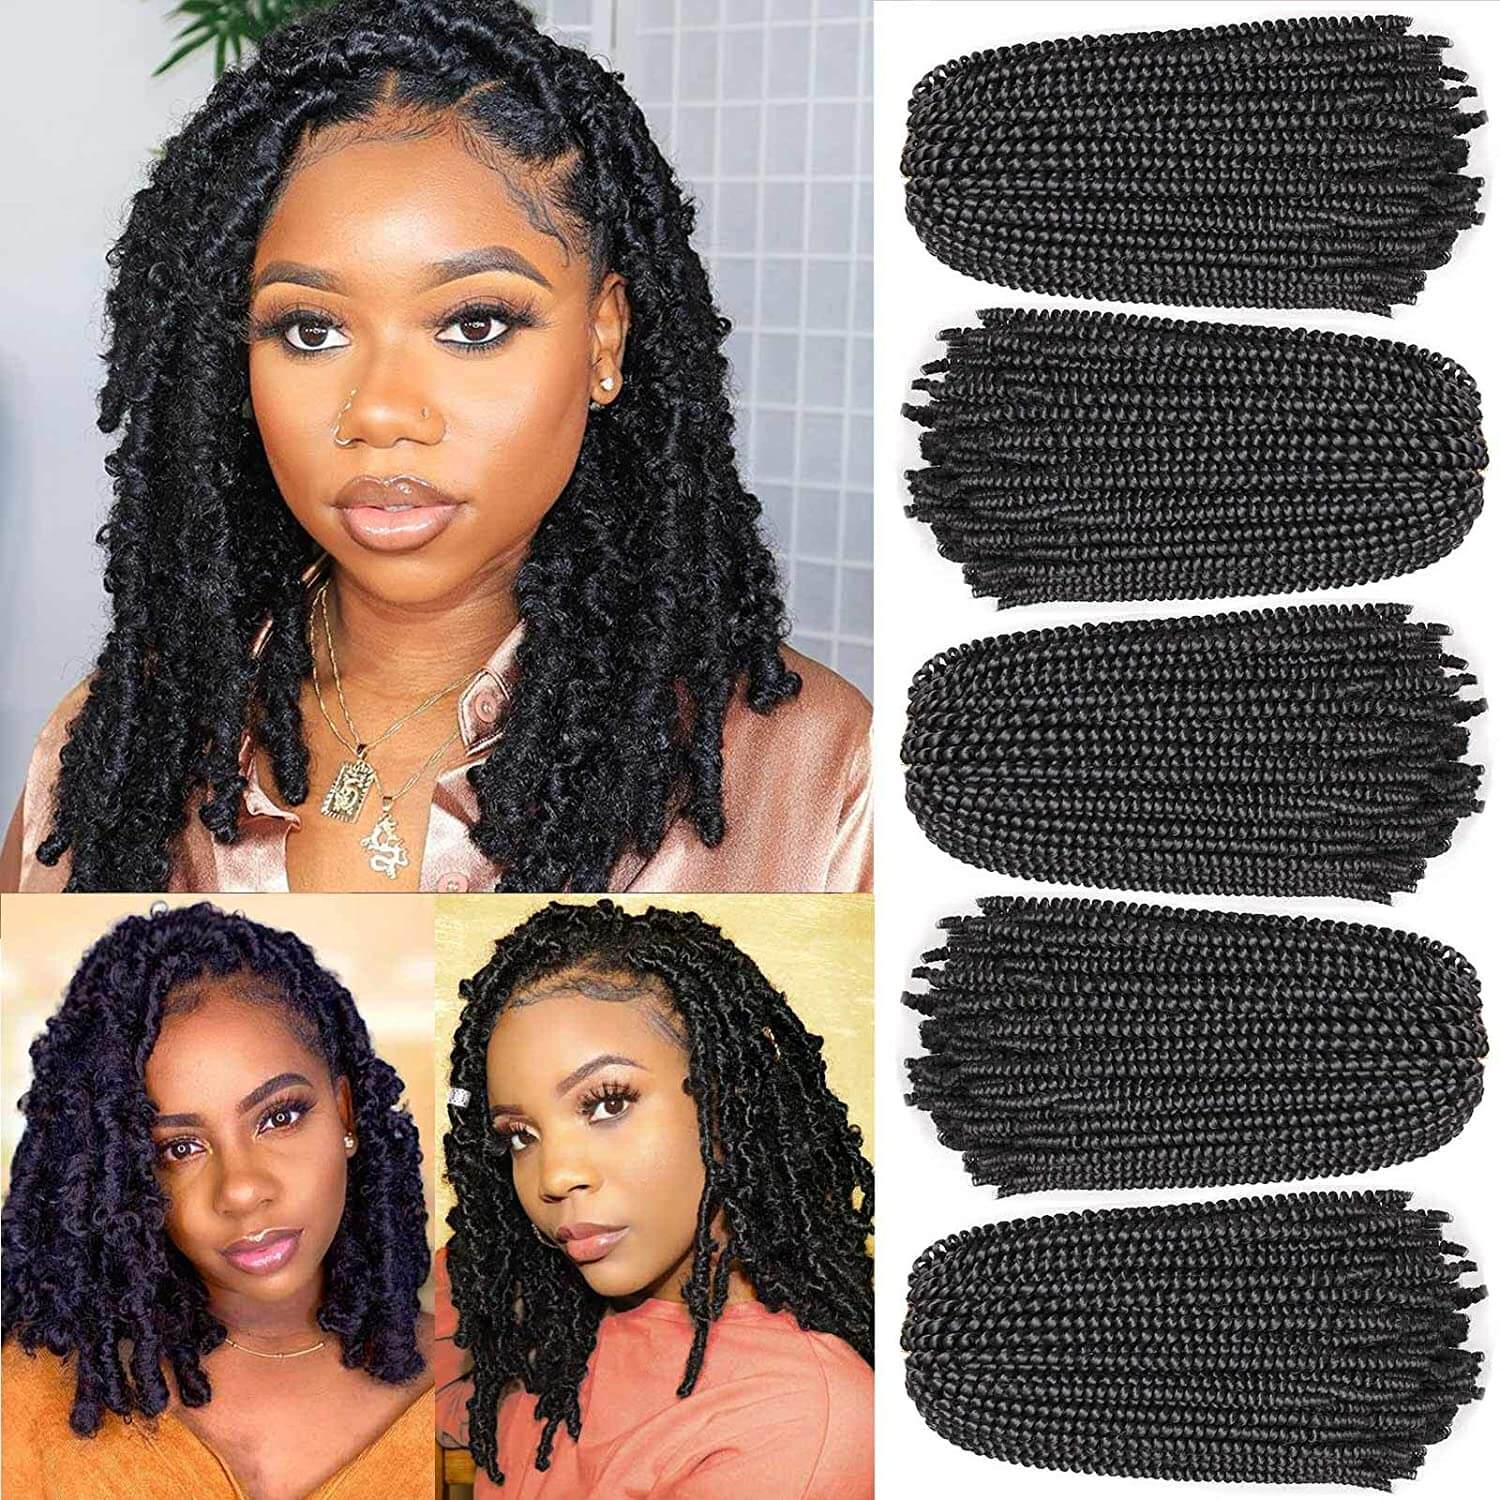 12 Inch Spring Twist Ombre Colors Butterfly locs Crochet Braiding Hair  Extensions – Xtrend Hair